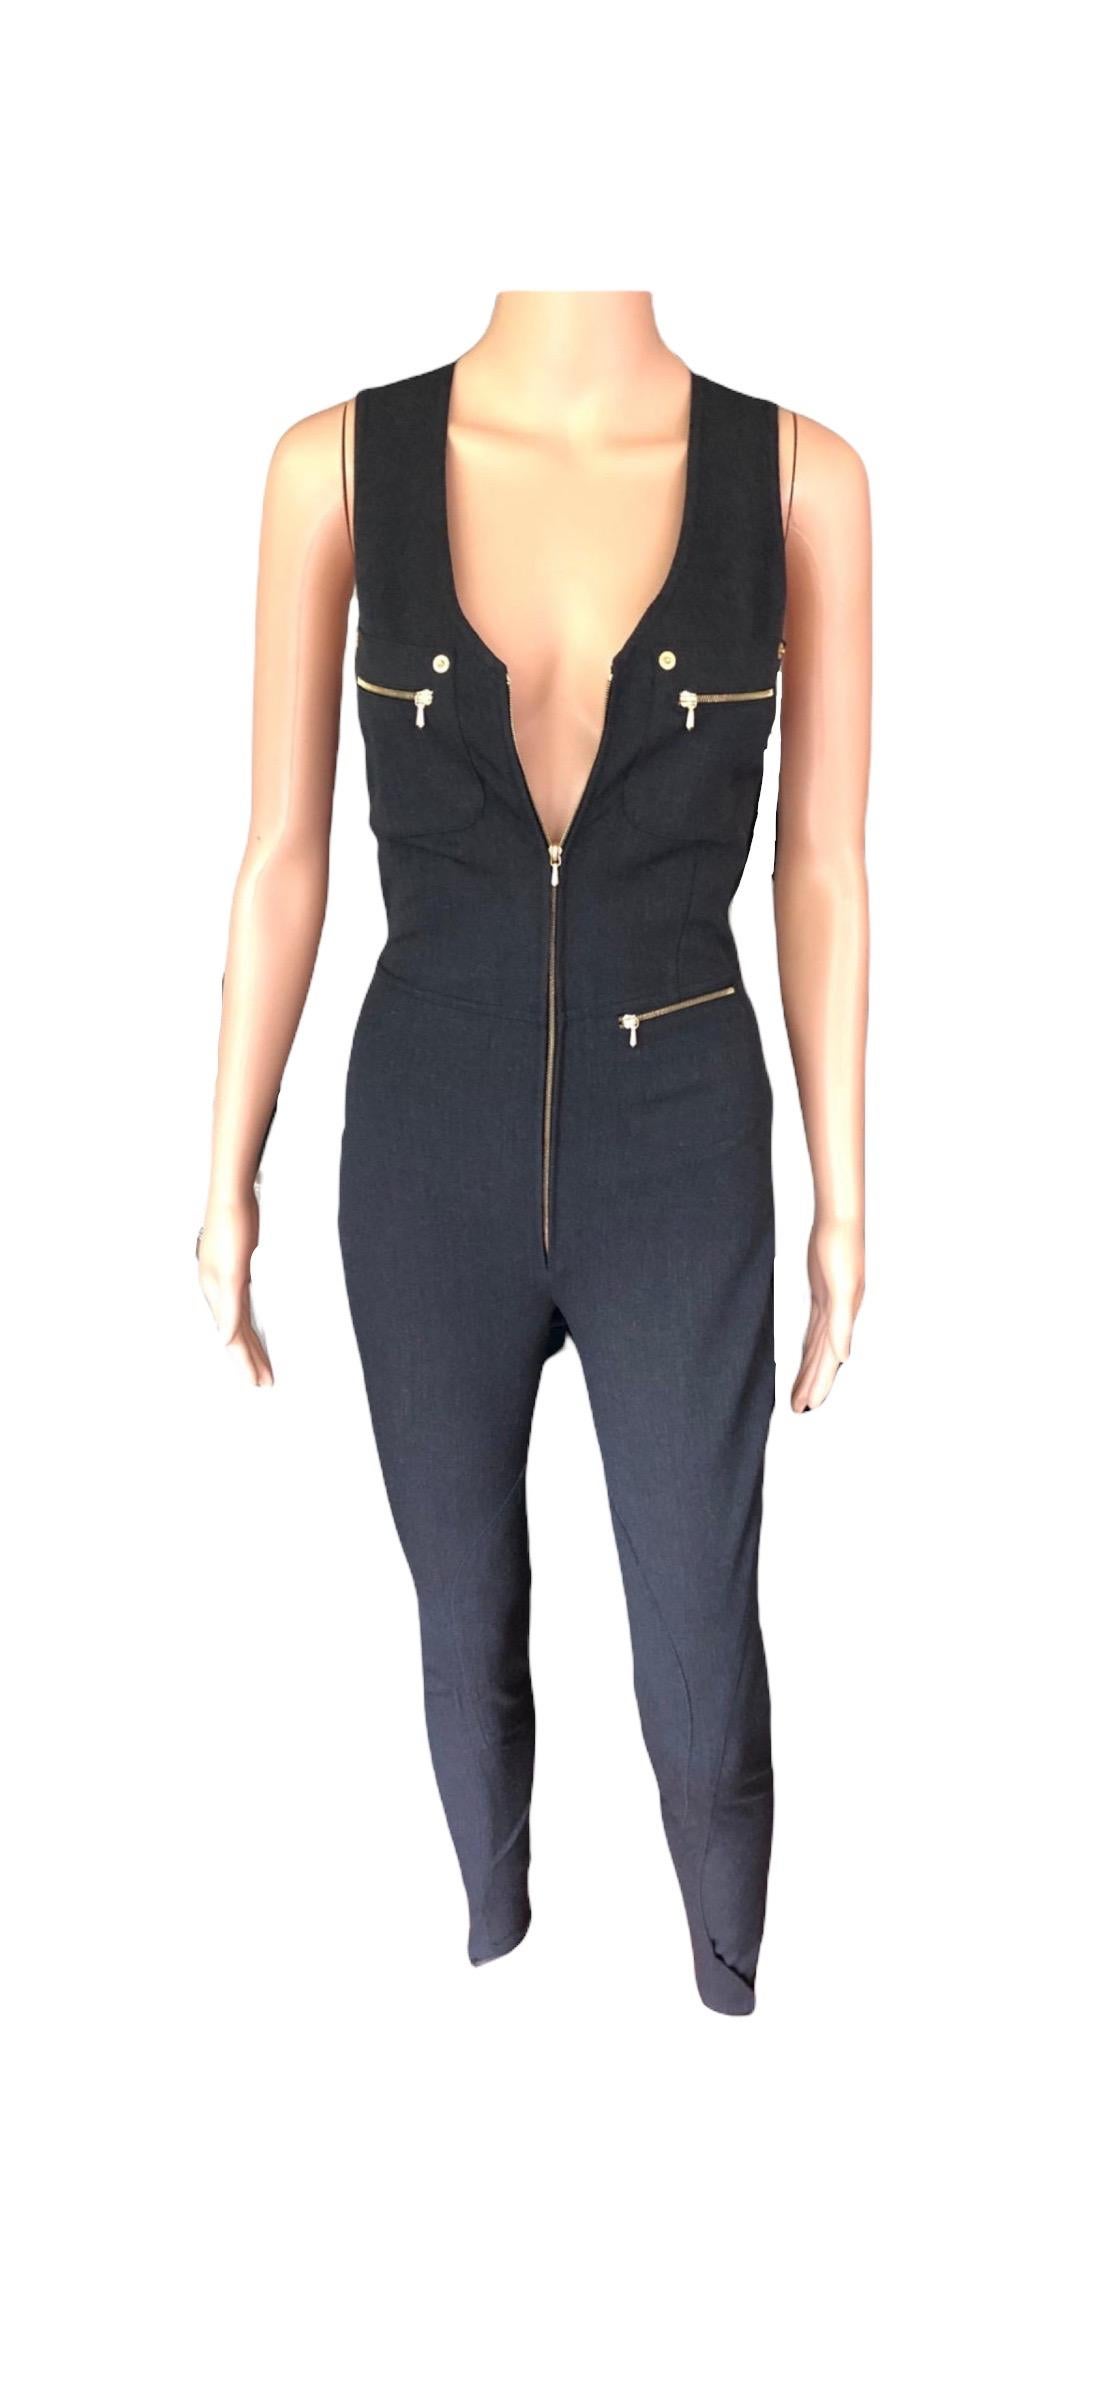 Tom Ford for Gucci S/S 1993 Runway Vintage Zipper Jumpsuit For Sale 6